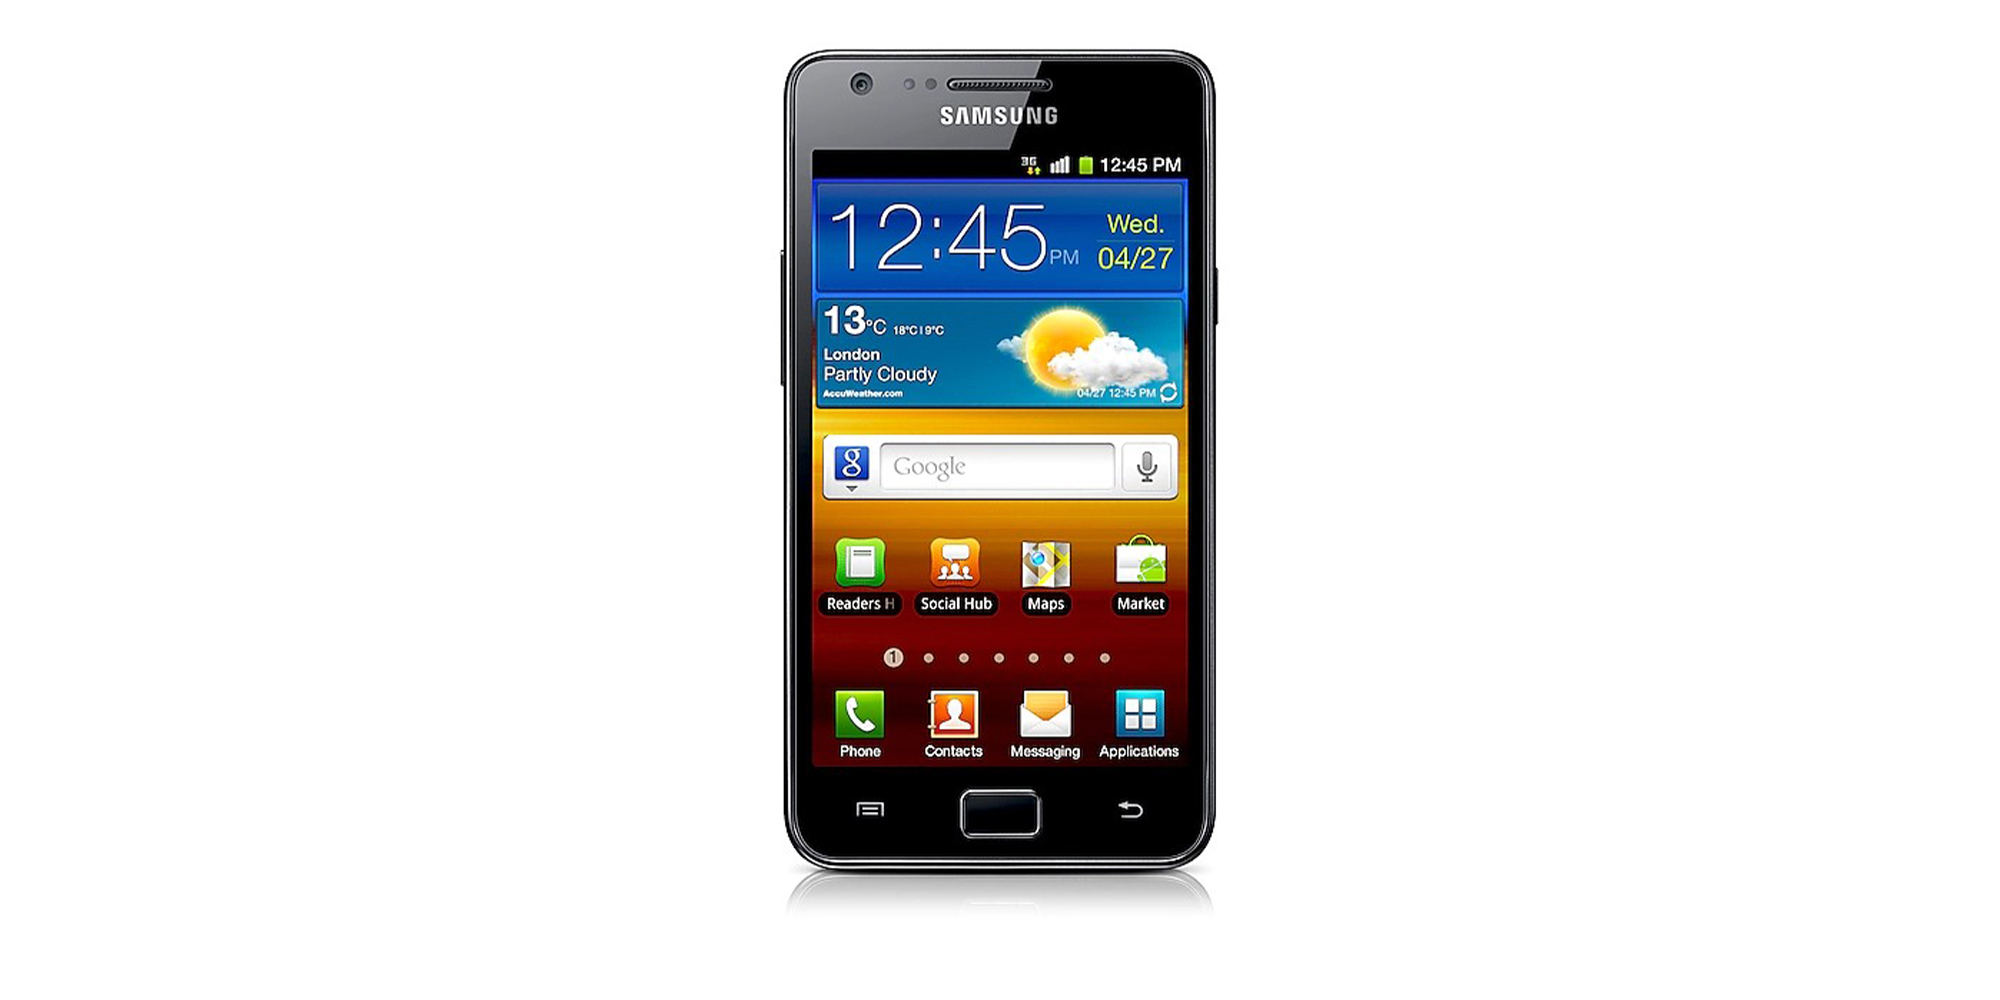 Developer ports Android to the Samsung Galaxy S2 - 9to5Google